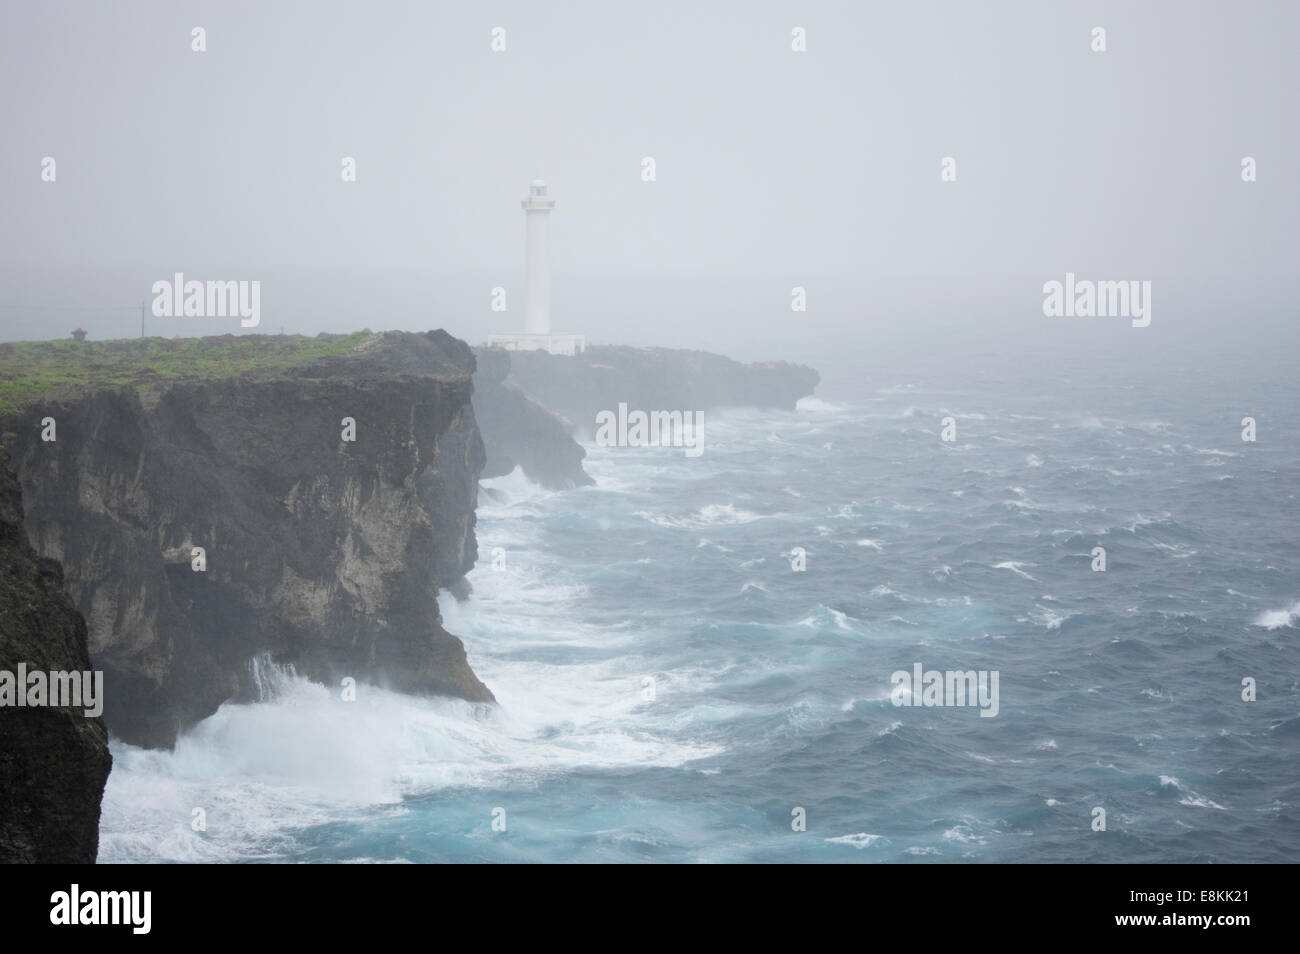 Cape Zanpa, Okinawa, Japan. The approach of Typhoon Vongfong brings wind, rain and rough seas. Oct 10, 2014  Locals are getting ready for the possibility of extreme and damaging winds. Credit:  Chris Willson/Alamy Live News Stock Photo